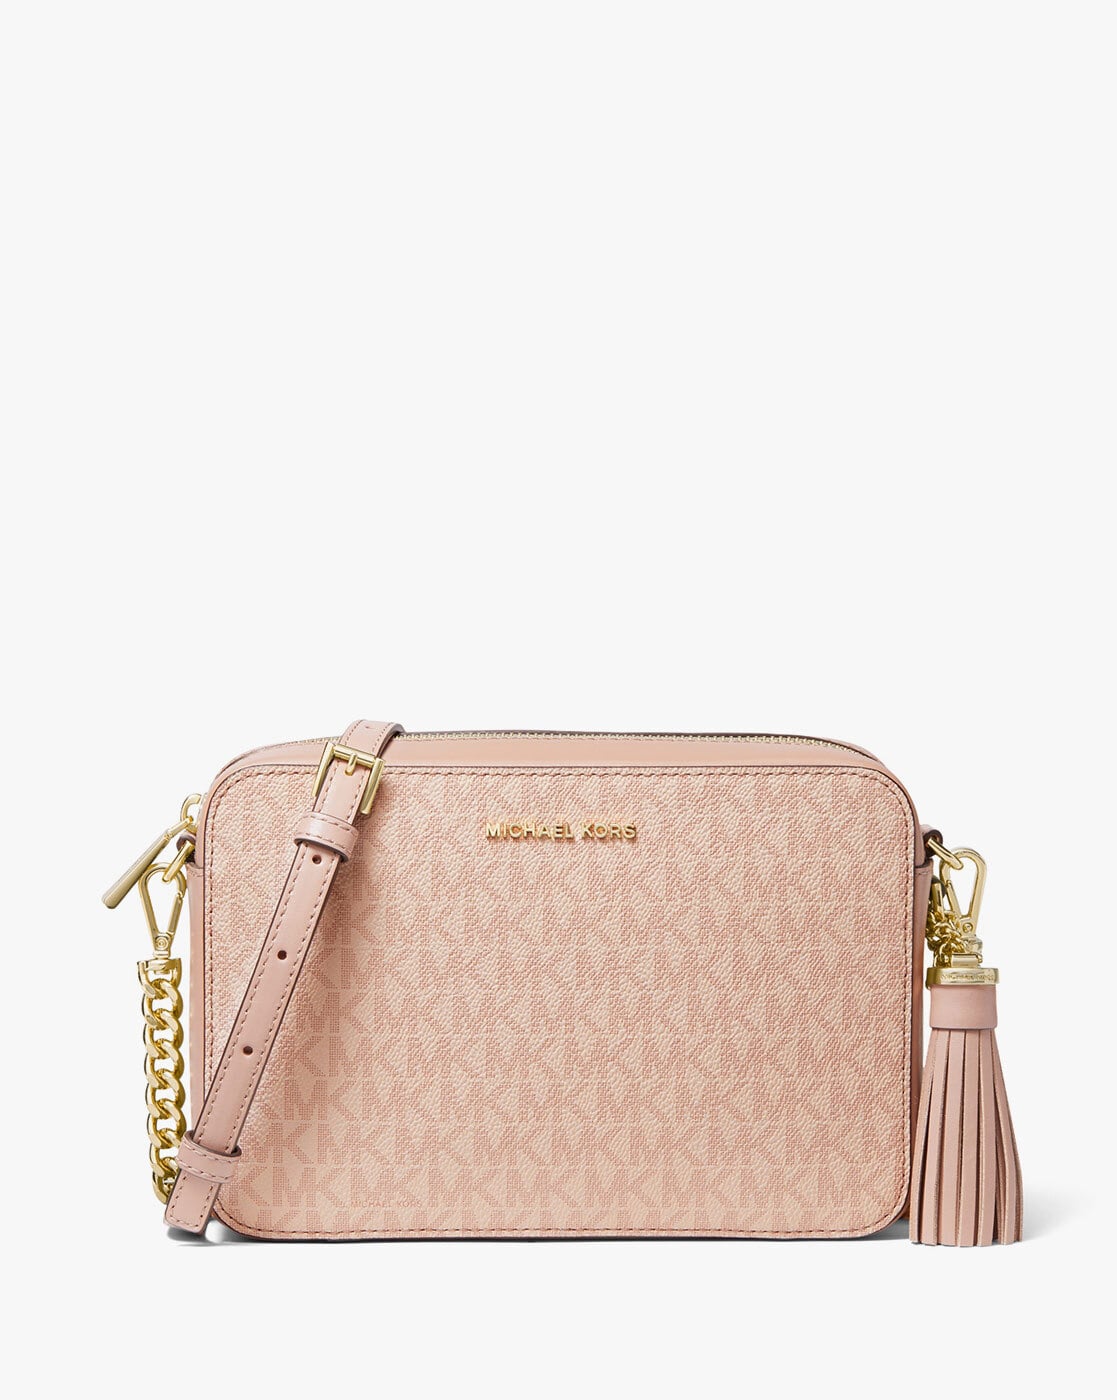 Amazon.com: Michael Kors Maisie Large Pebbled Leather 3-in-1 Tote Bag  Powder Blush Pink MK : Clothing, Shoes & Jewelry